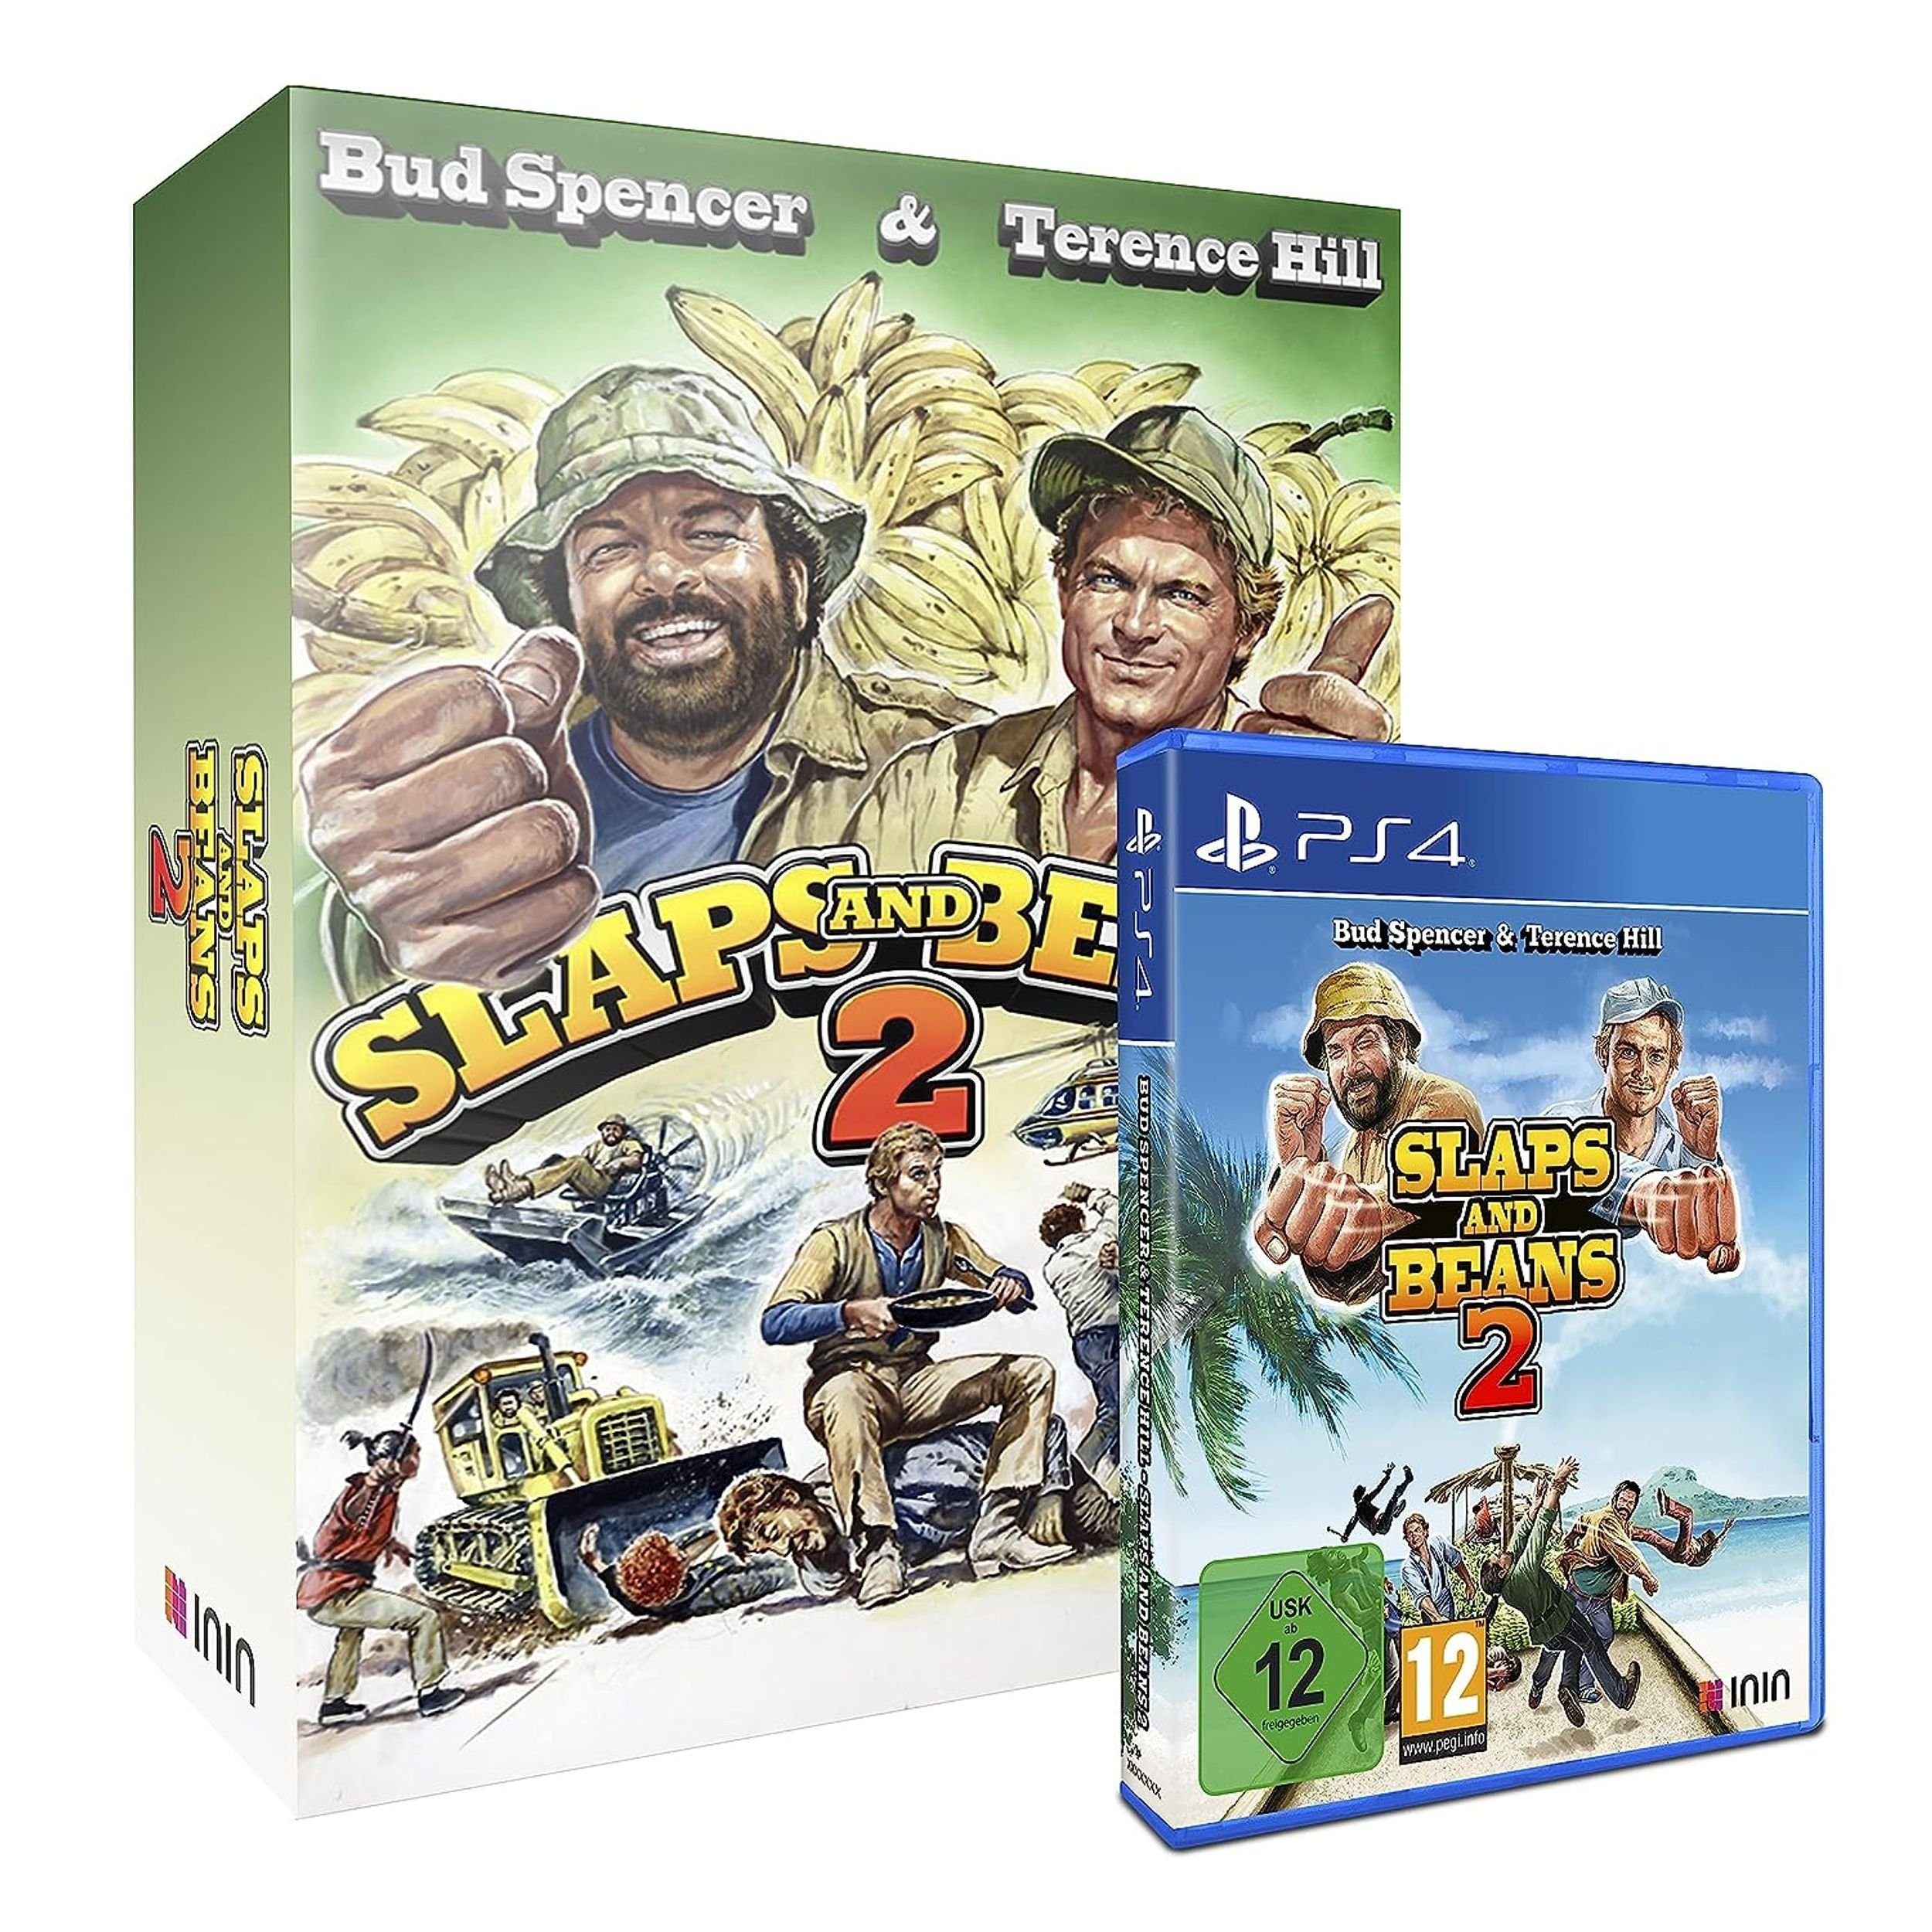 Hill Beans Slaps - and CE 2 Playstation Terence Bud Spencer 4 &